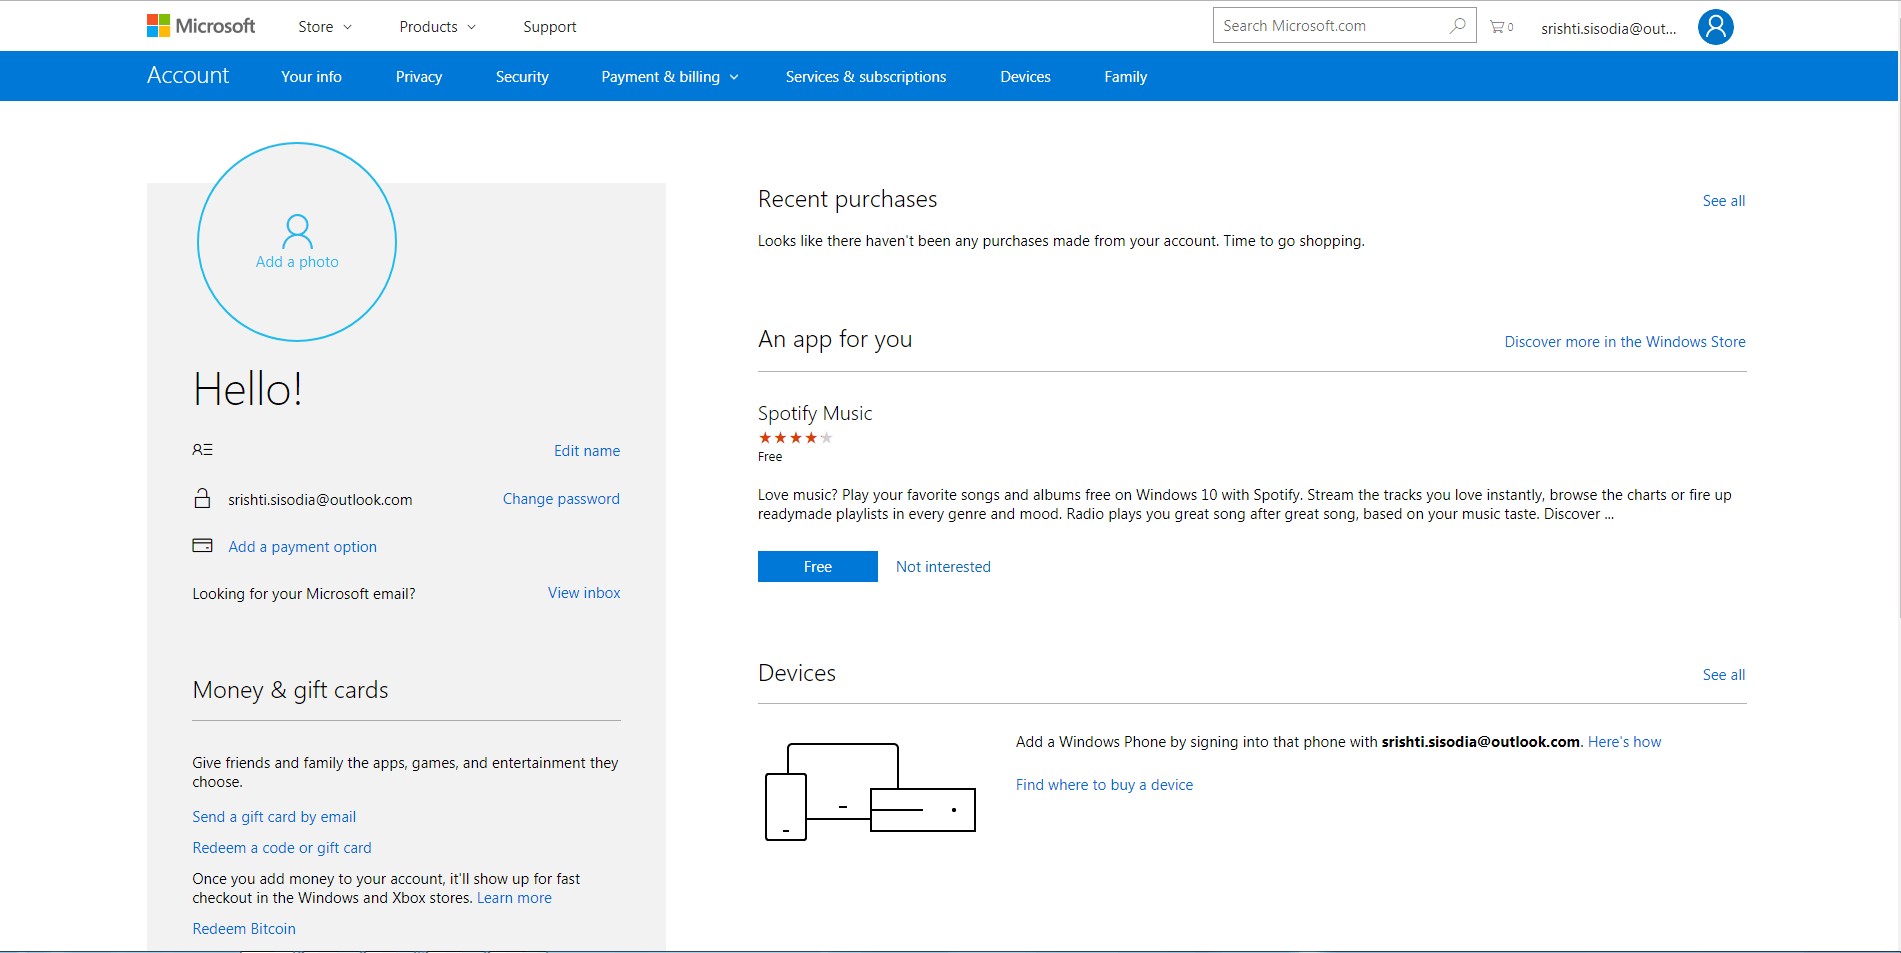 microsoft office account page